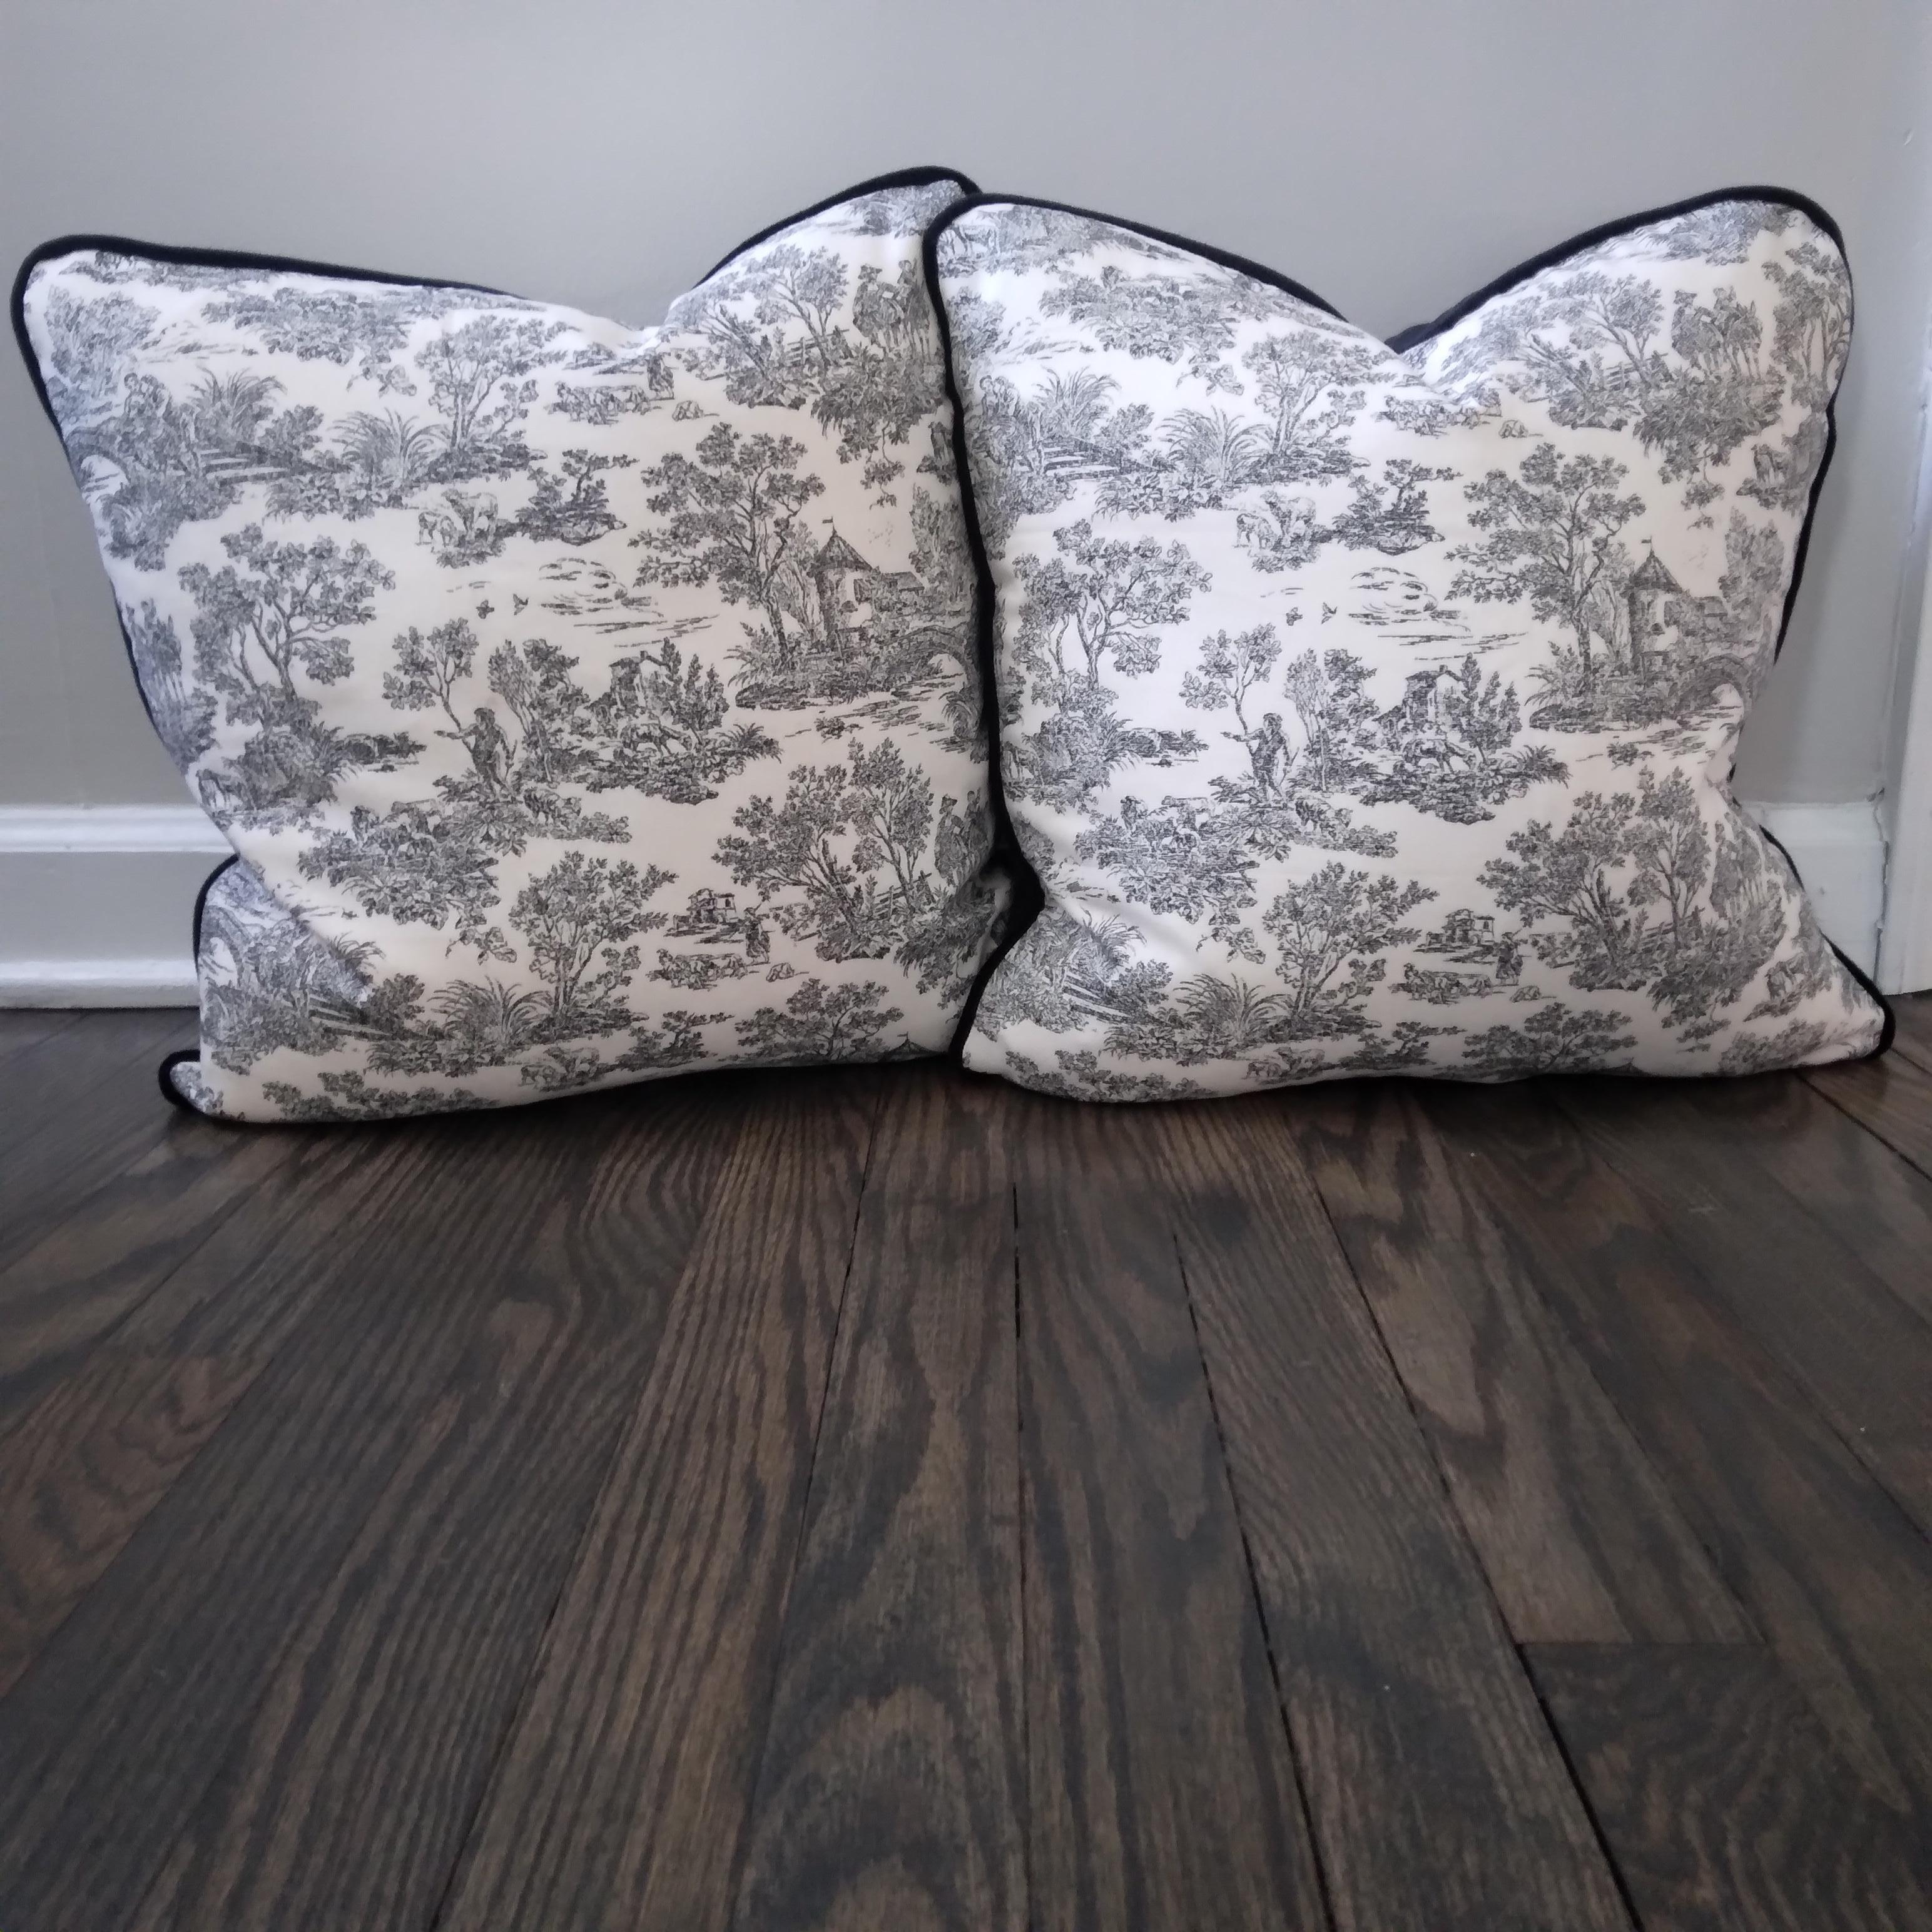 Classic and whimsical, these stylish pillows are the perfect way to enliven to home. Bucolic-inspired scenes represented in high-contrast black on white, create a romantic feel that we just love! Black velvet covers the back and welt, amplifying the